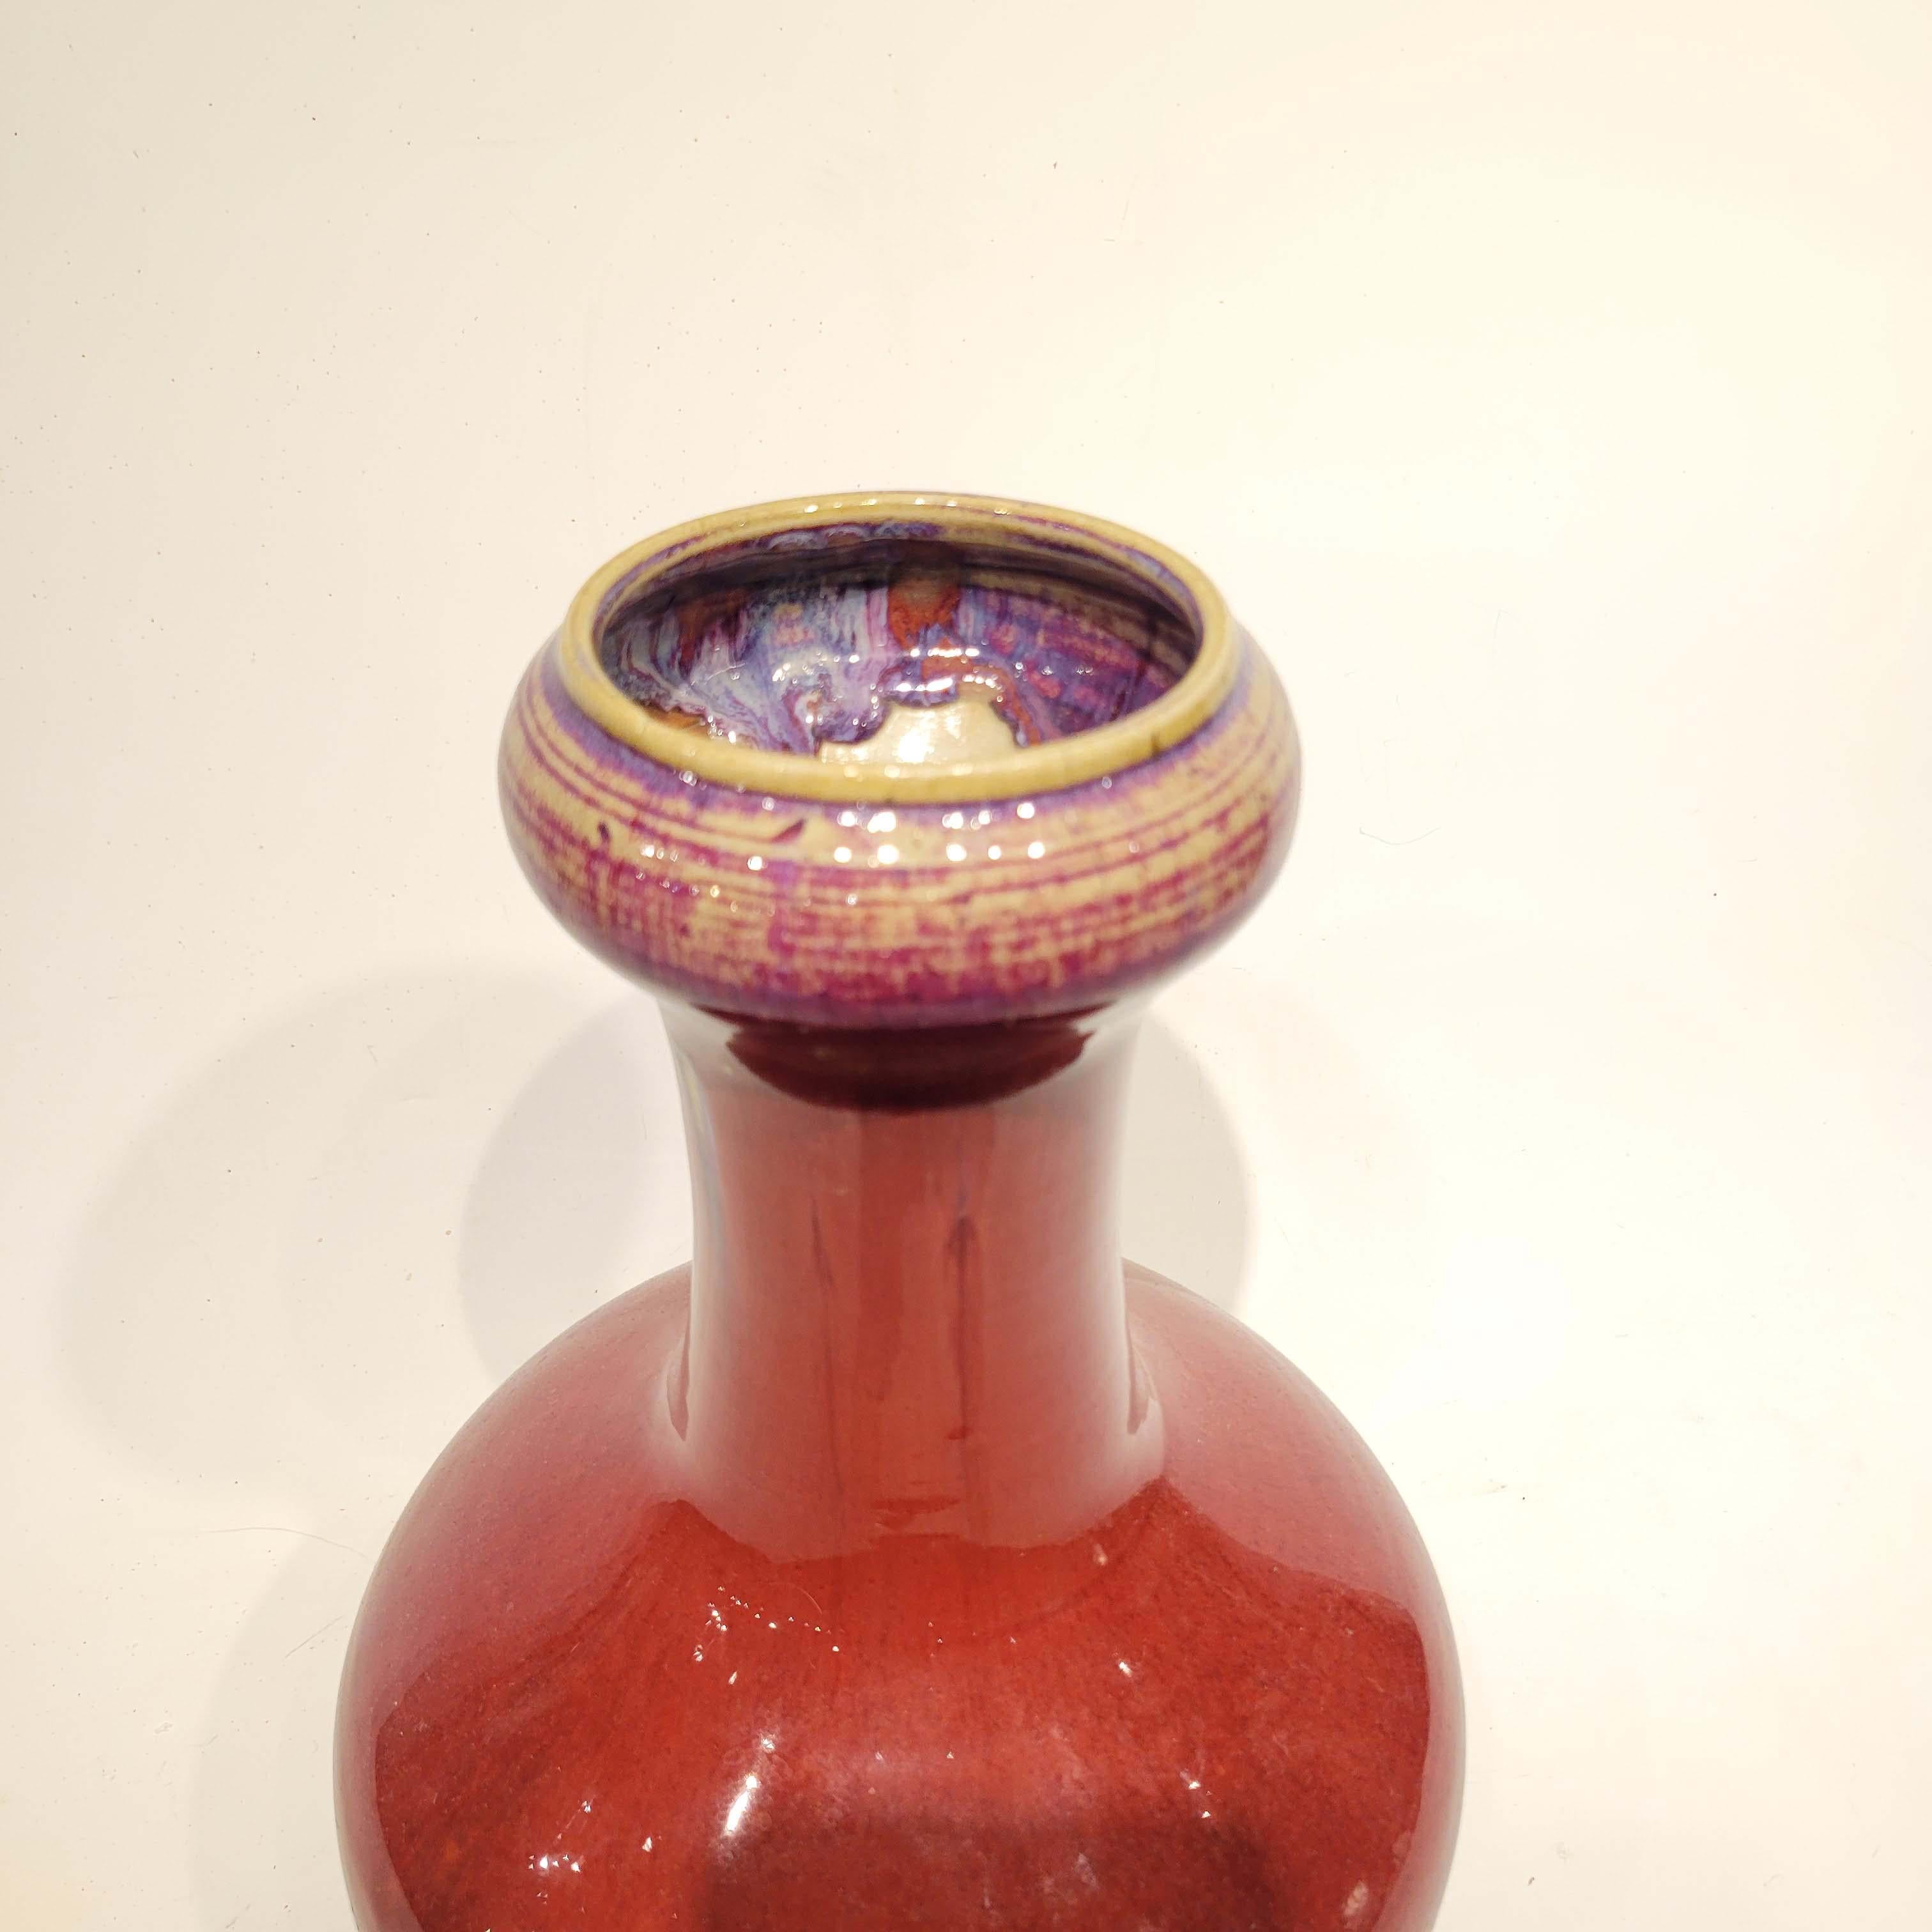 A wonderful and early Chinese ox blood garlic neck vase, signed under the base.
The vase has a crack around the body and a crack running down the neck and is sold as is.